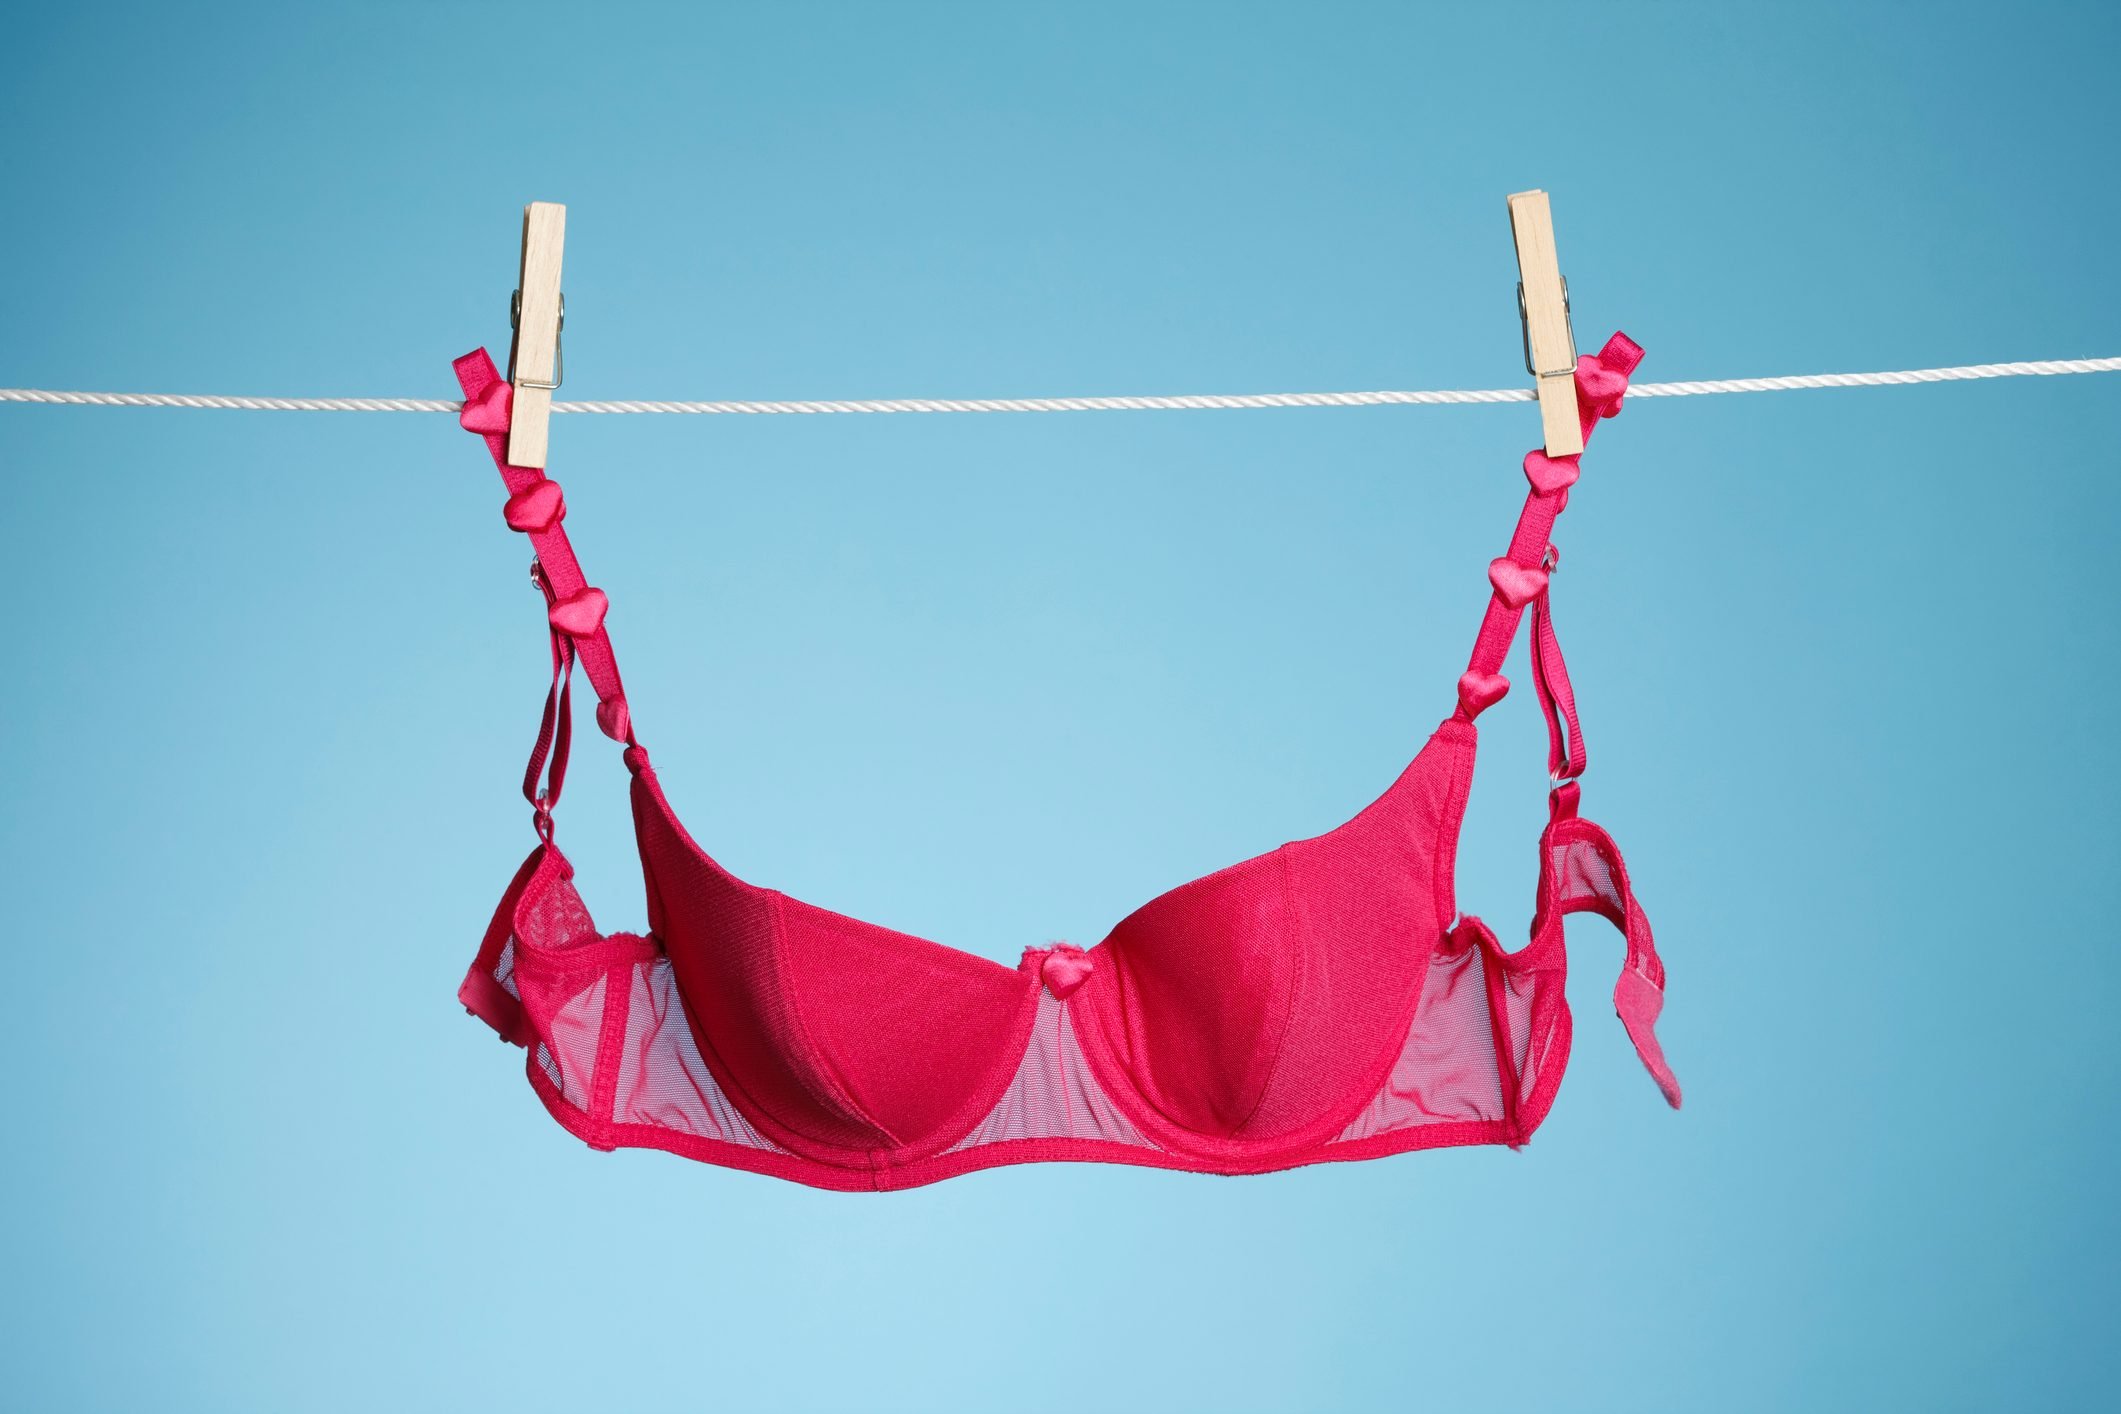 How to Air Dry Lingerie Without That Awful Damp Smell